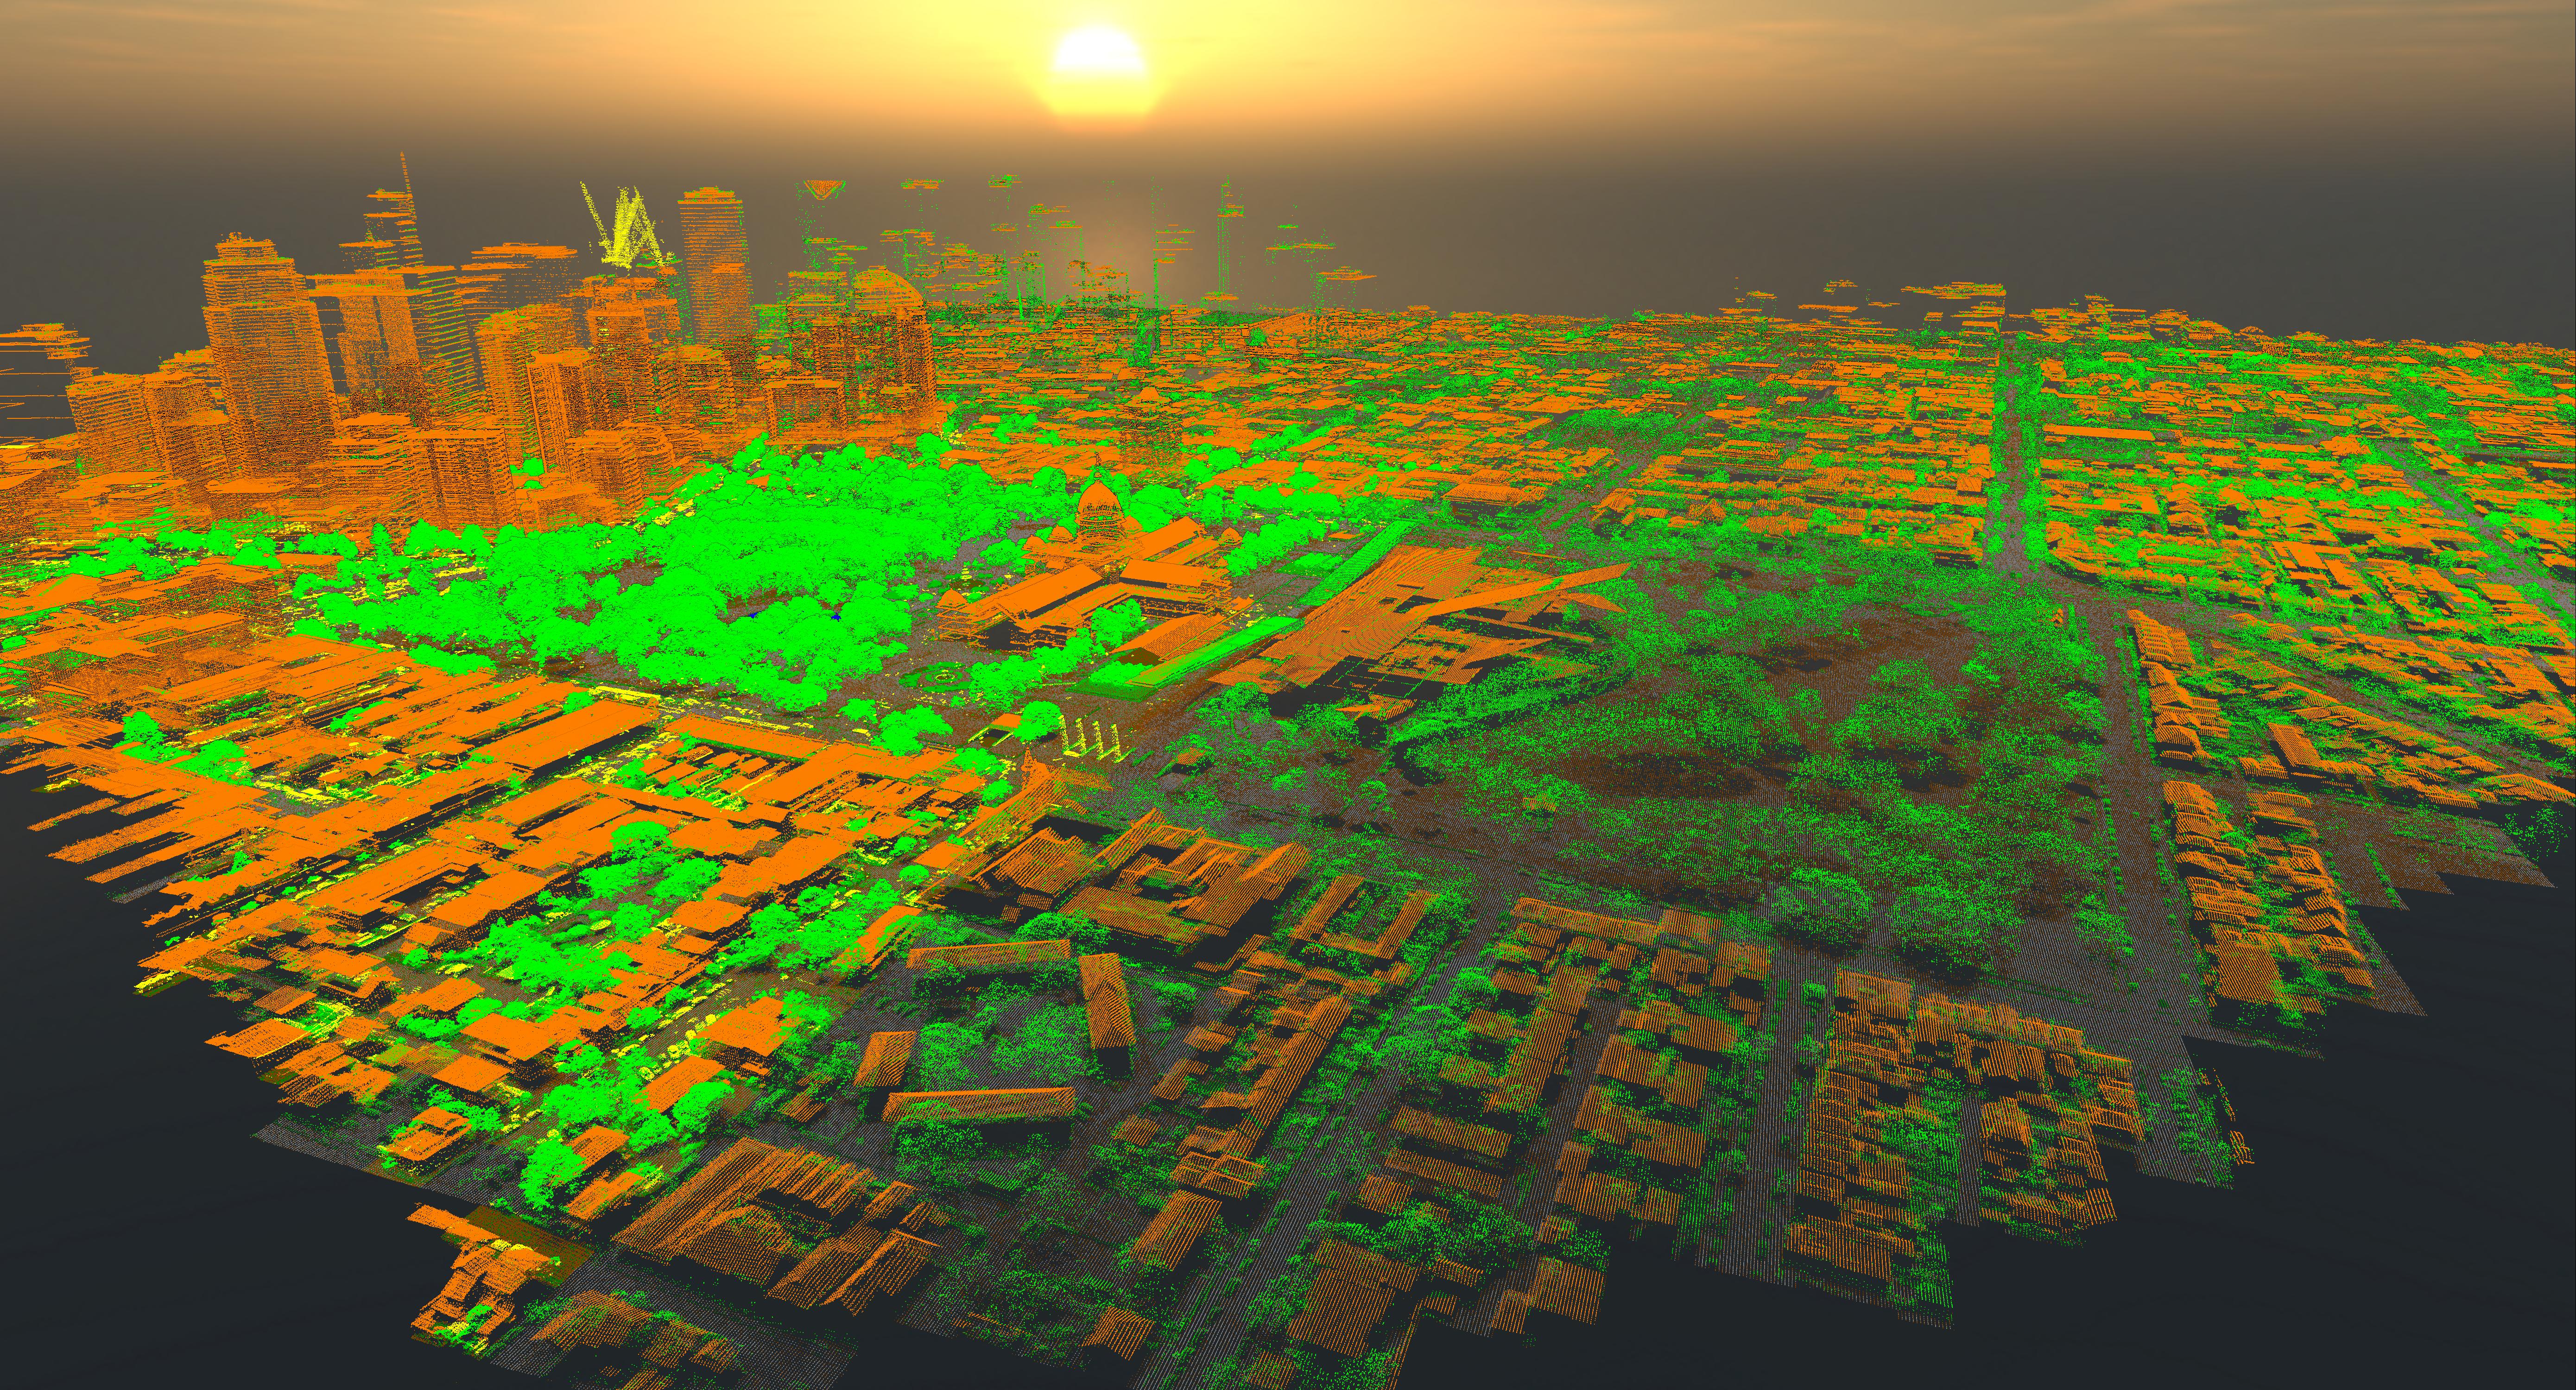 A point-cloud LiDAR image looking across Carlton Gardens towards the CBD. A false sun effect appears on the horizon and the model casts shadows from this light source. The edges of the model are solid black. Roads are coloured in grey along streets, around the edges of Carlton Gardens and on pathways that criss-cross the gardens. Tree growth is coloured in vibrant shades of green, and built structures are coloured in orange.